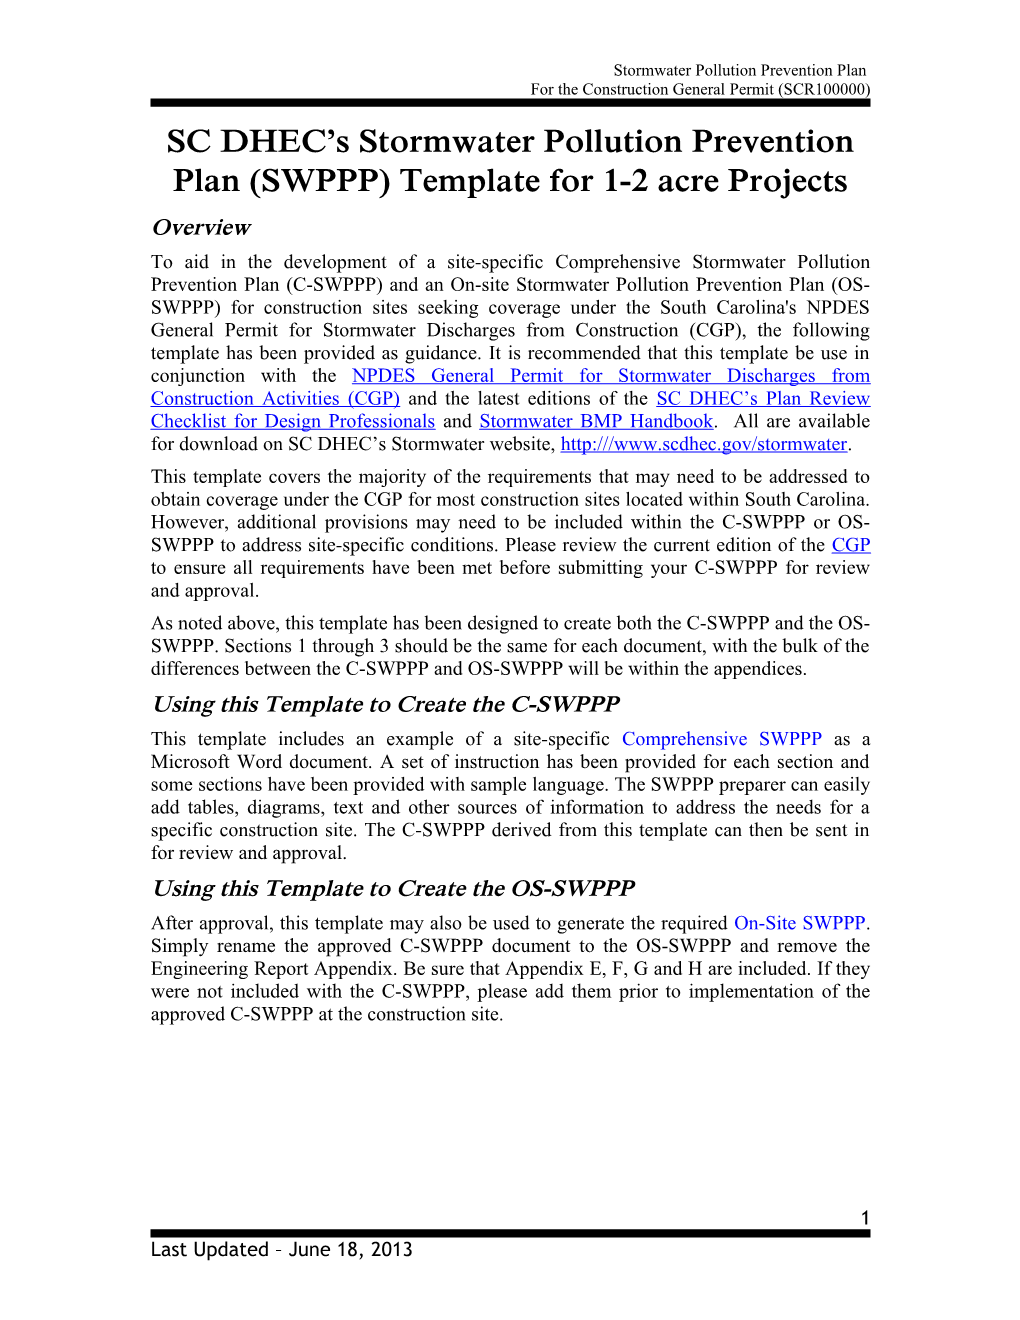 SC DHEC S Stormwater Pollution Prevention Plan (SWPPP) Template for 1-2 Acre Projects